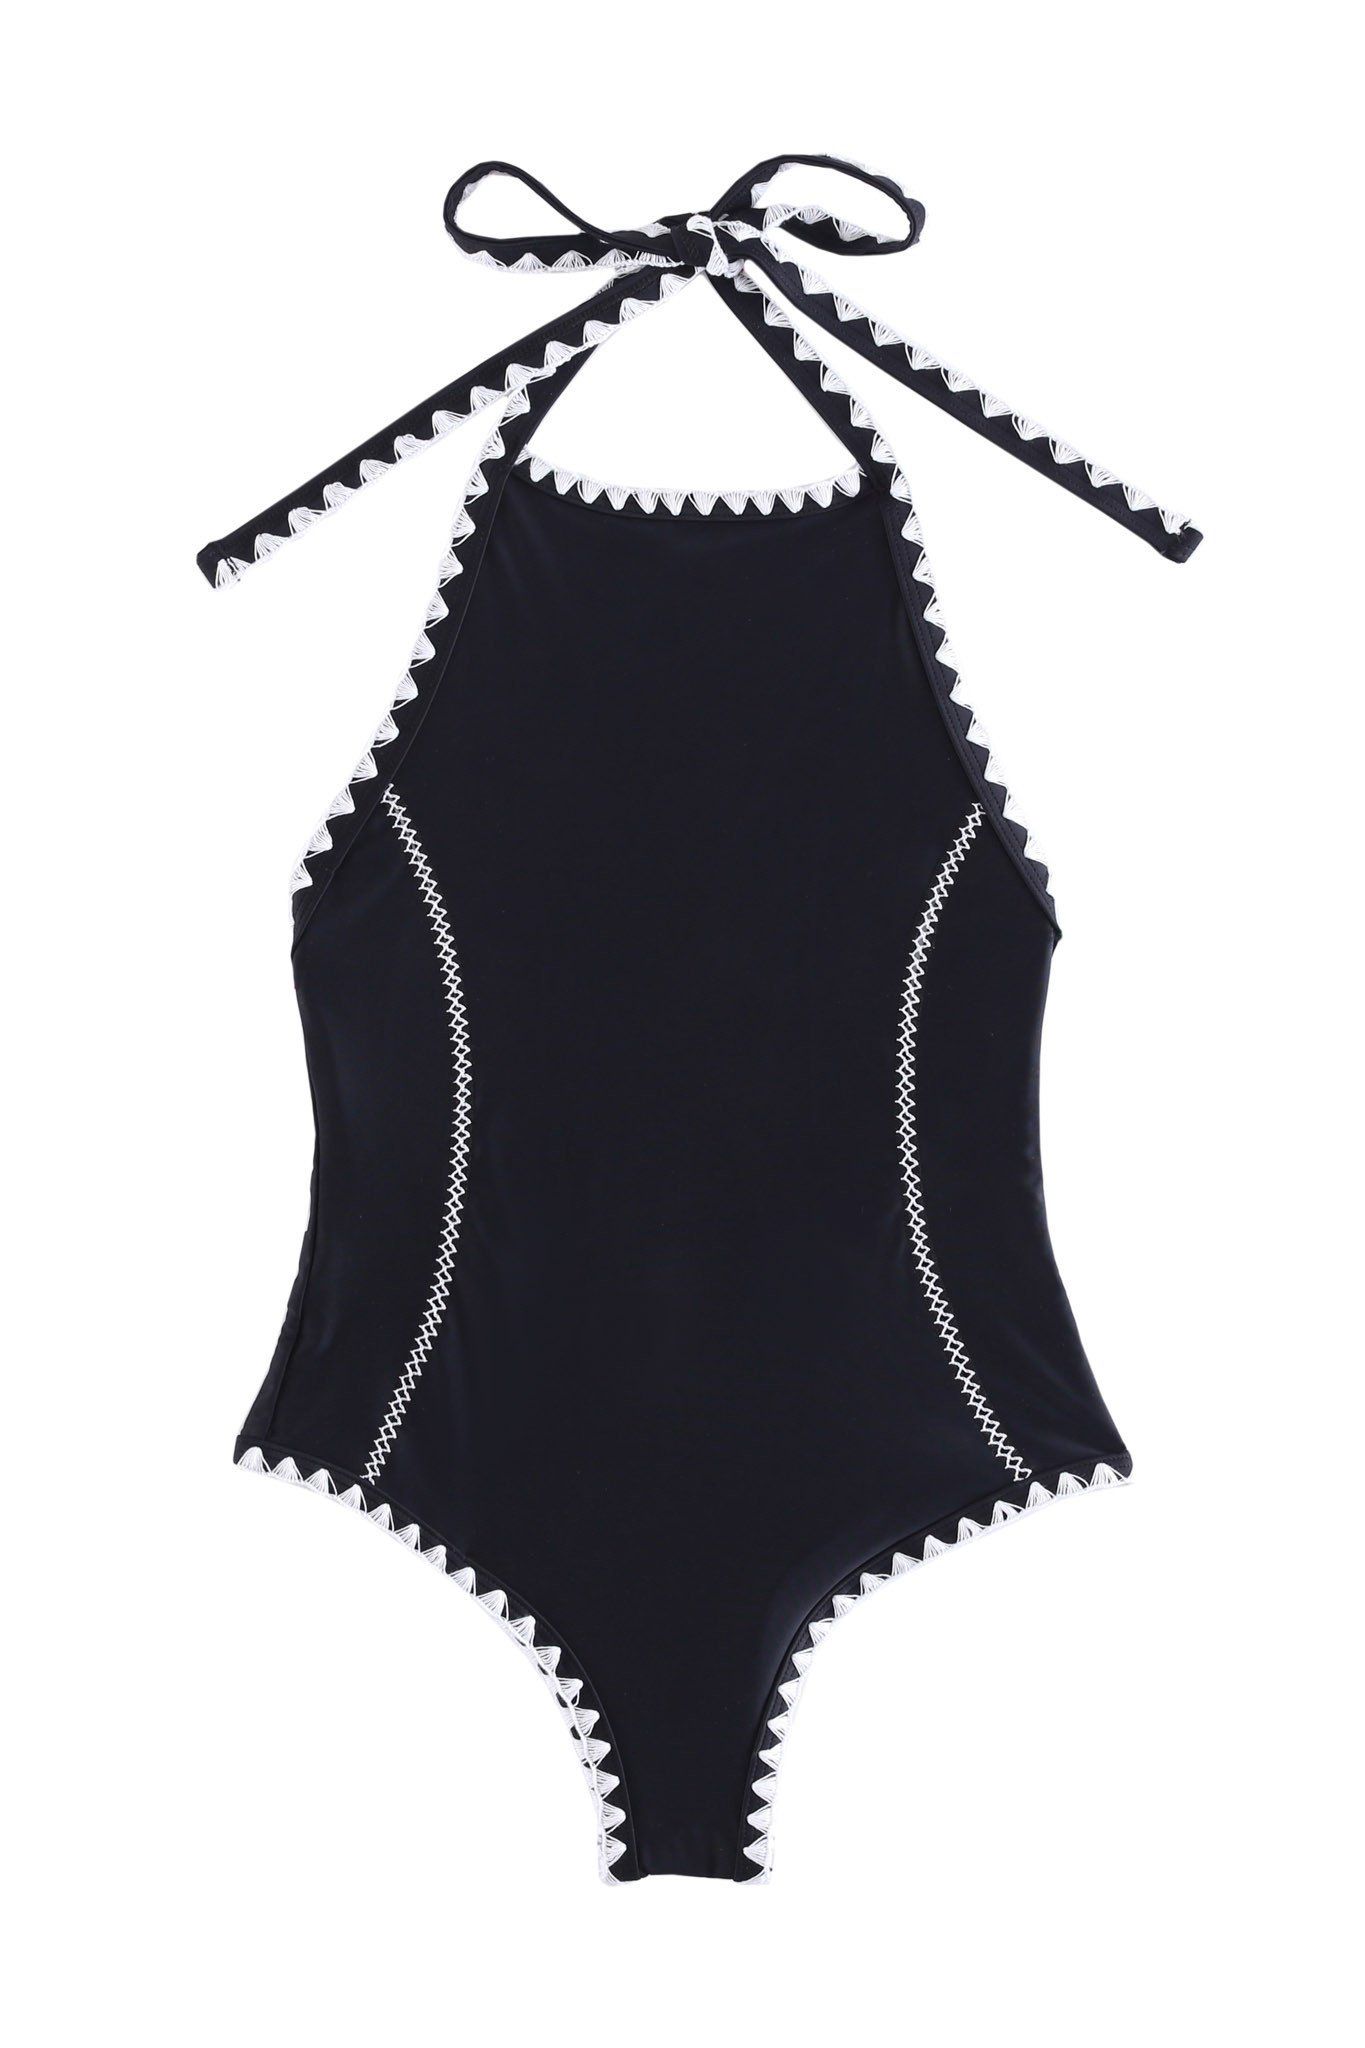 the most understated swimsuits of 2018